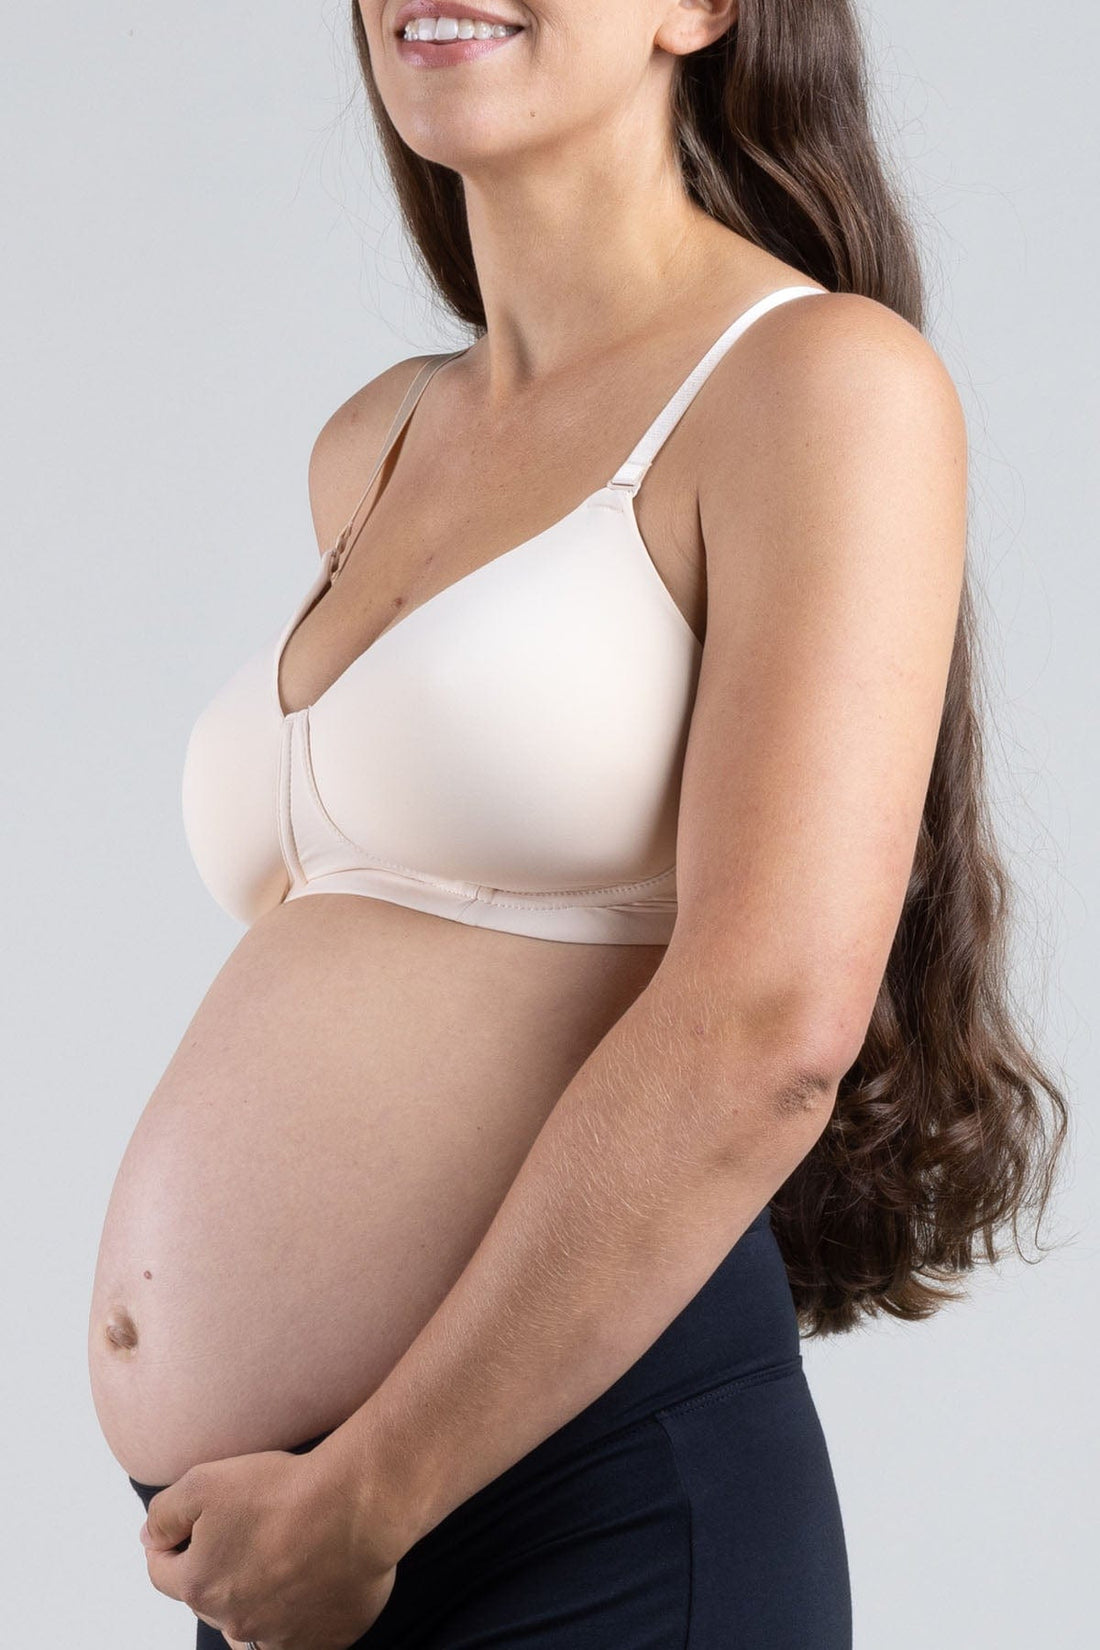 Simple Wishes: Do I need a nursing bra? Hide the nursing clasp in the NEW  No Commitment Maternity & Nursing Bra